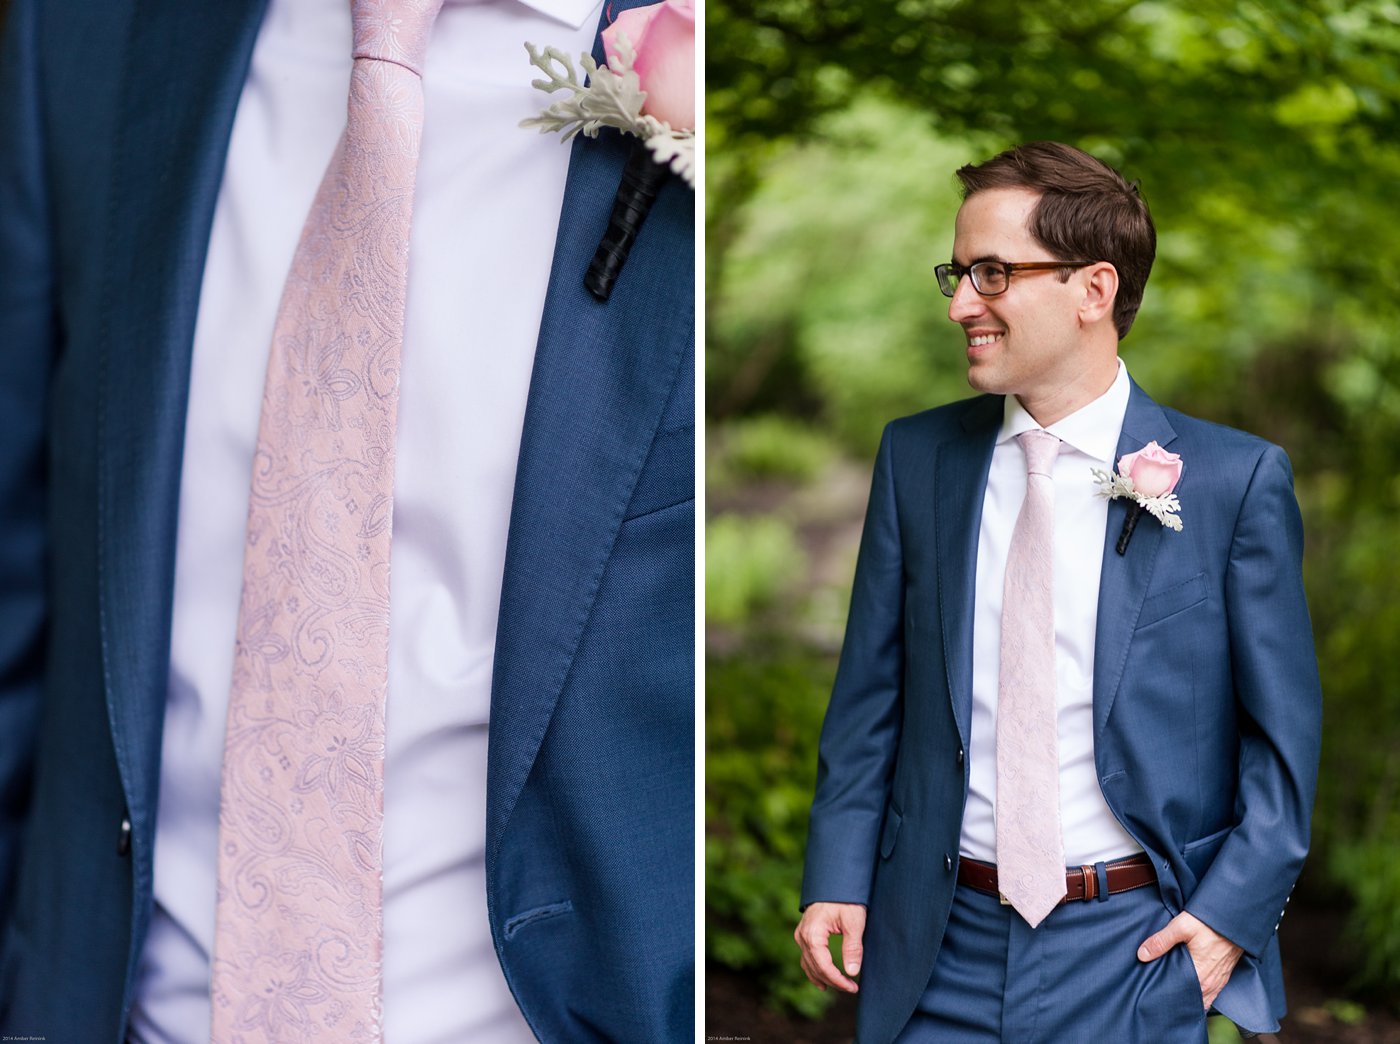 Groom wearing blue suit and pink tie at Thorpewood Mountain Memories wedding Thurmont, MD